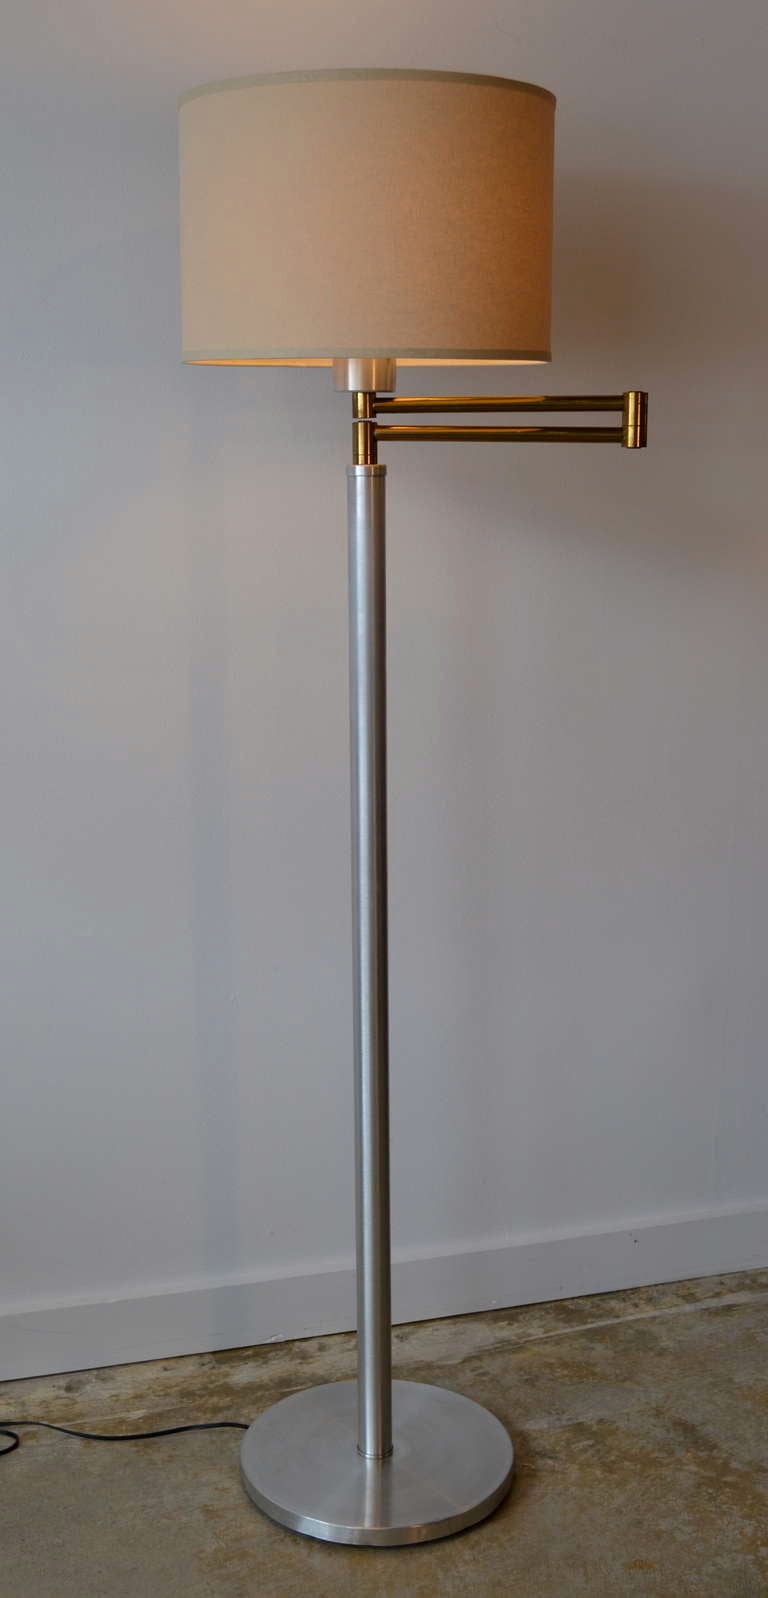 Aluminum and Brass floor lamp in the style of Walter Von Nessen. Rewired. Shade not included. 